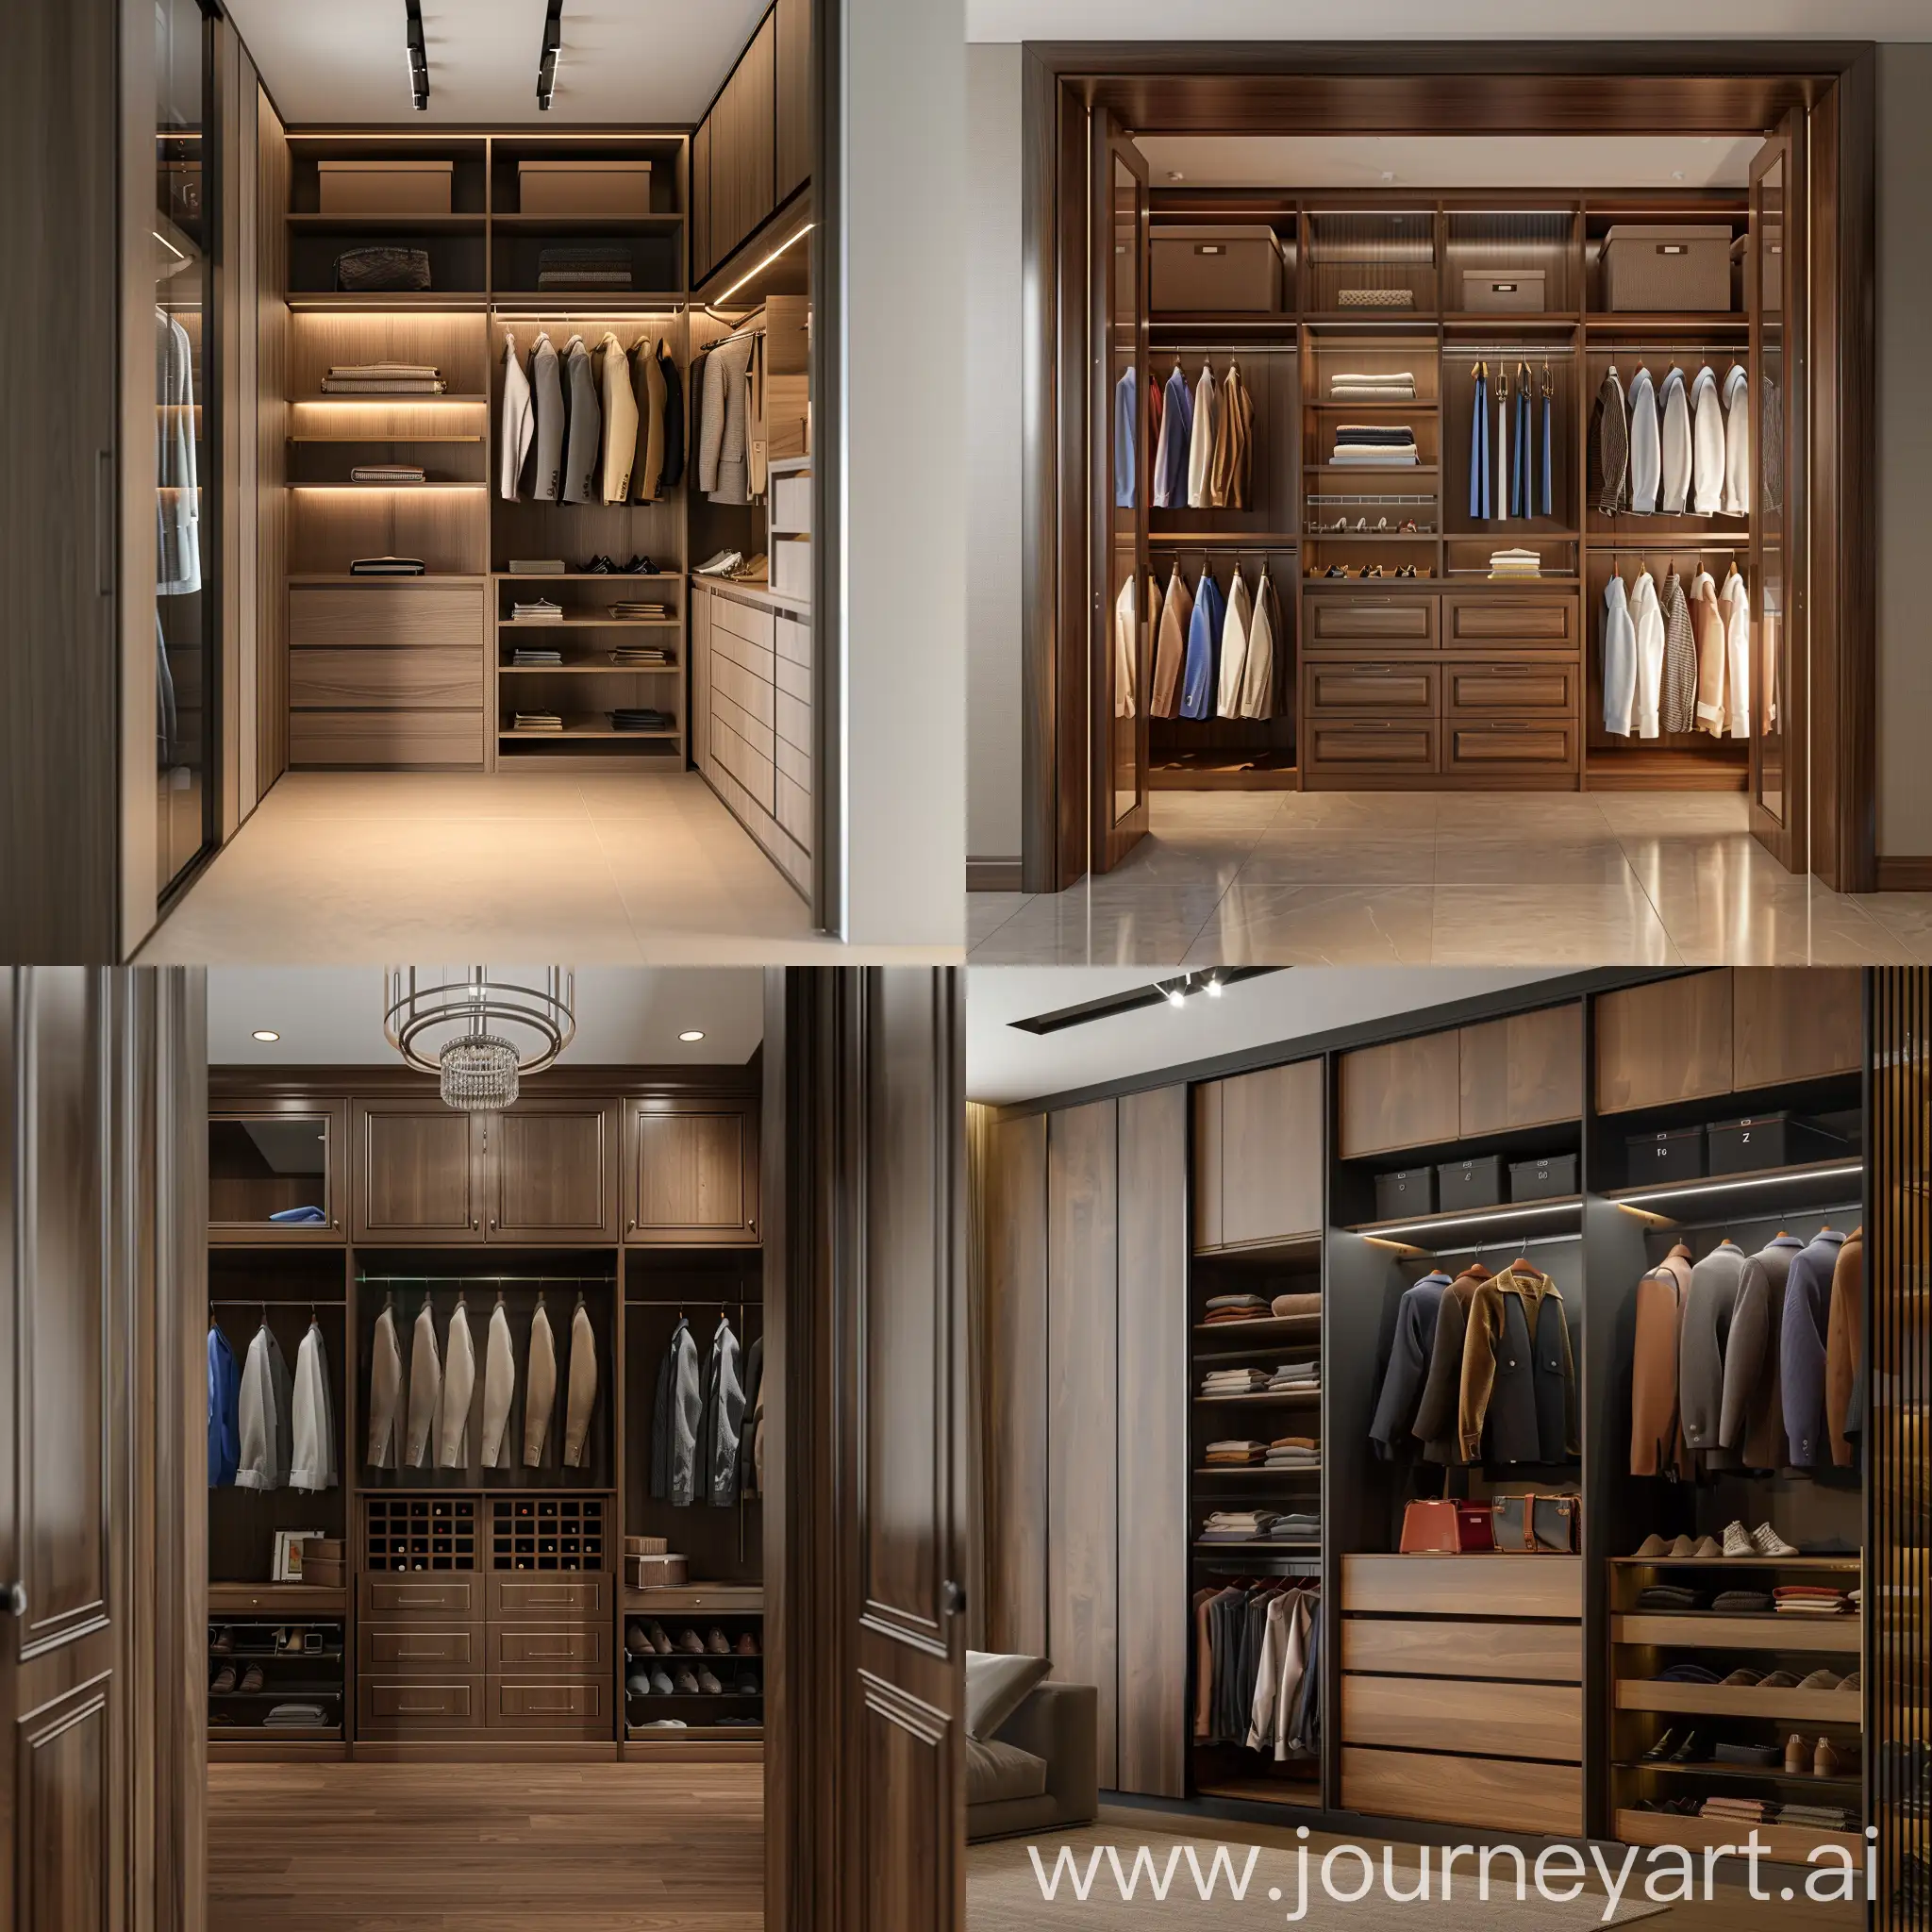 realistic modern closets rta shaker cabinets in Florida, hd image quality, photo realistic, highly detailed, hyper-realistic, super detailed, high quality, high resolution, elegant, photography, photorealistic, ultra hd, hdr, 32k, cinematic, the photo is captured with a nikon z9 camera and a nikkor z 85mm f/1.2 lens, using an aperture of f/2.4